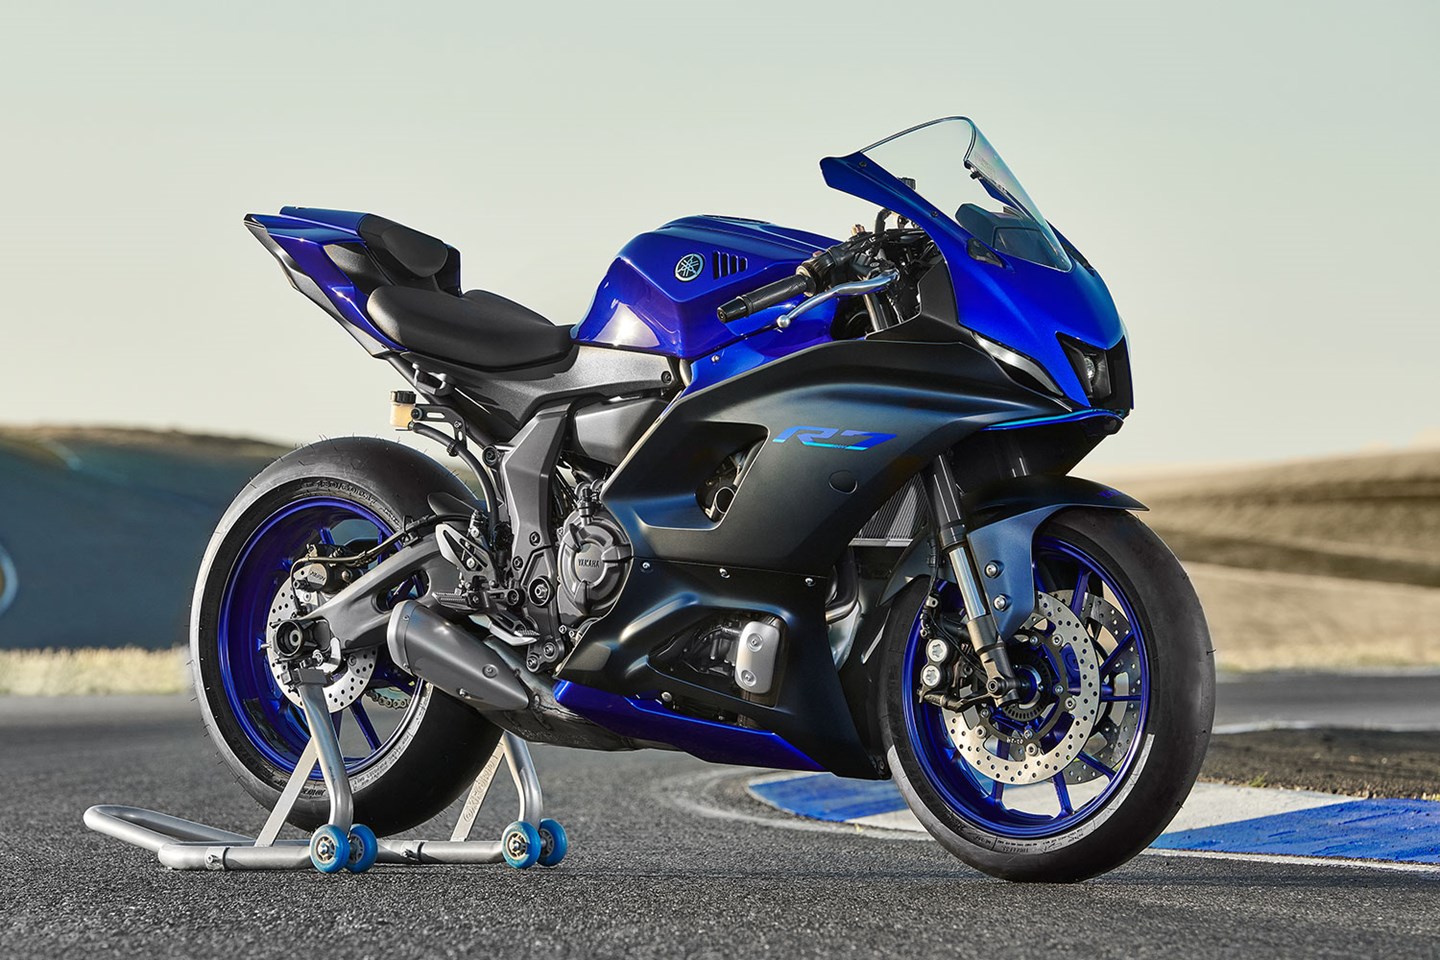 Seventh heaven: Yamaha R7 wraps up all the good bits of the MT-07 into